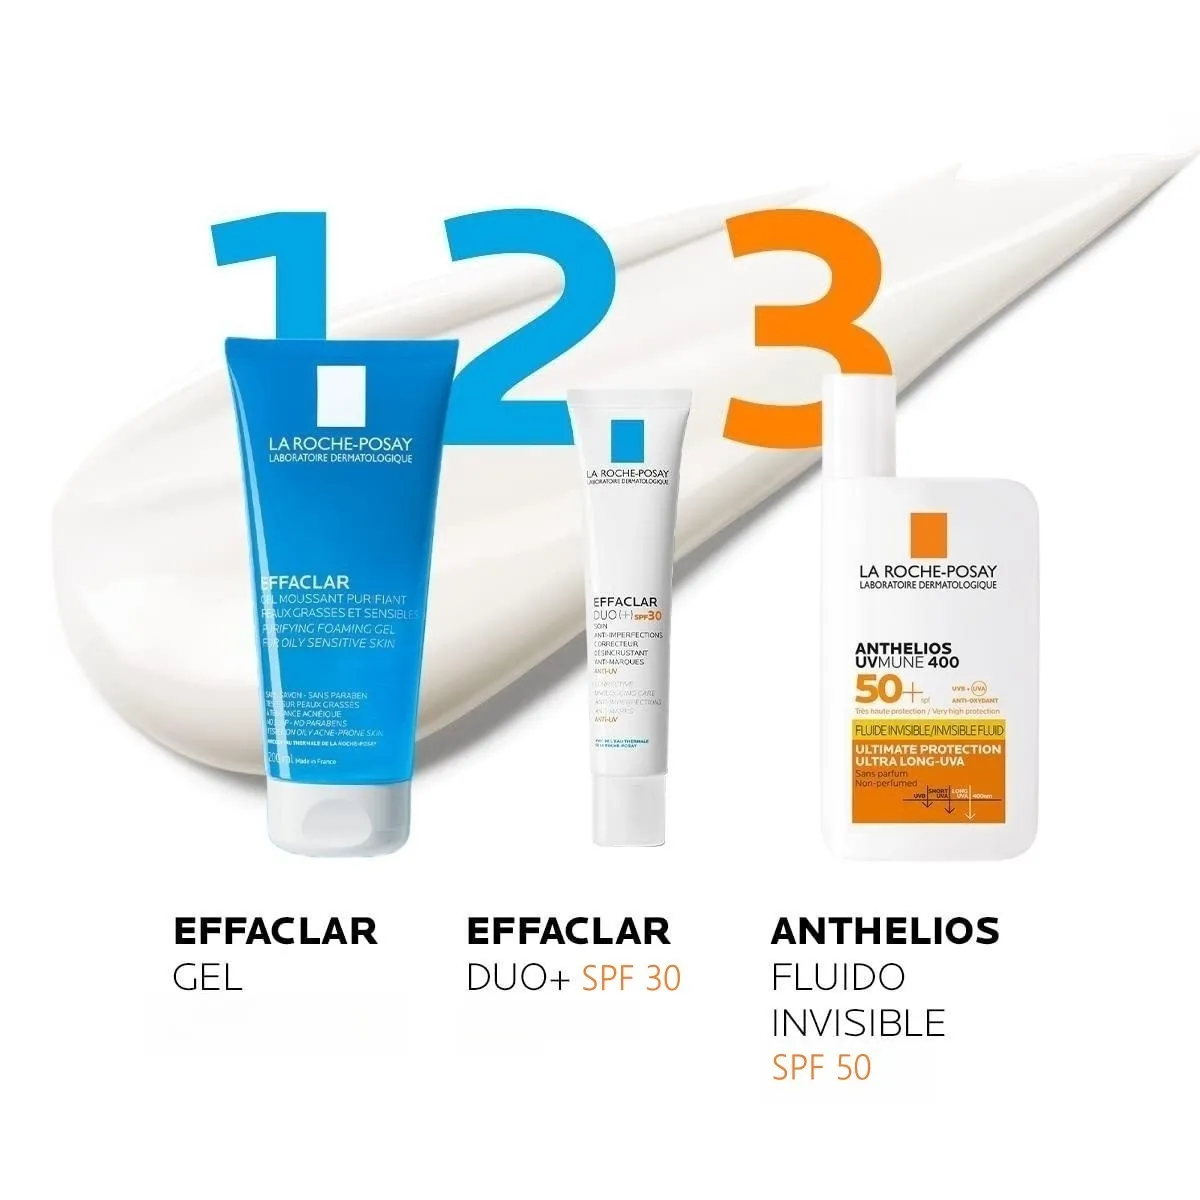 

La Roche-Posay EFFACLAR DUO+ SPF30 Lotion/Gel Cleanser/ANTHELIOS Sunscreen Daily Facial Care Anti-Imperfections For Oily Skin